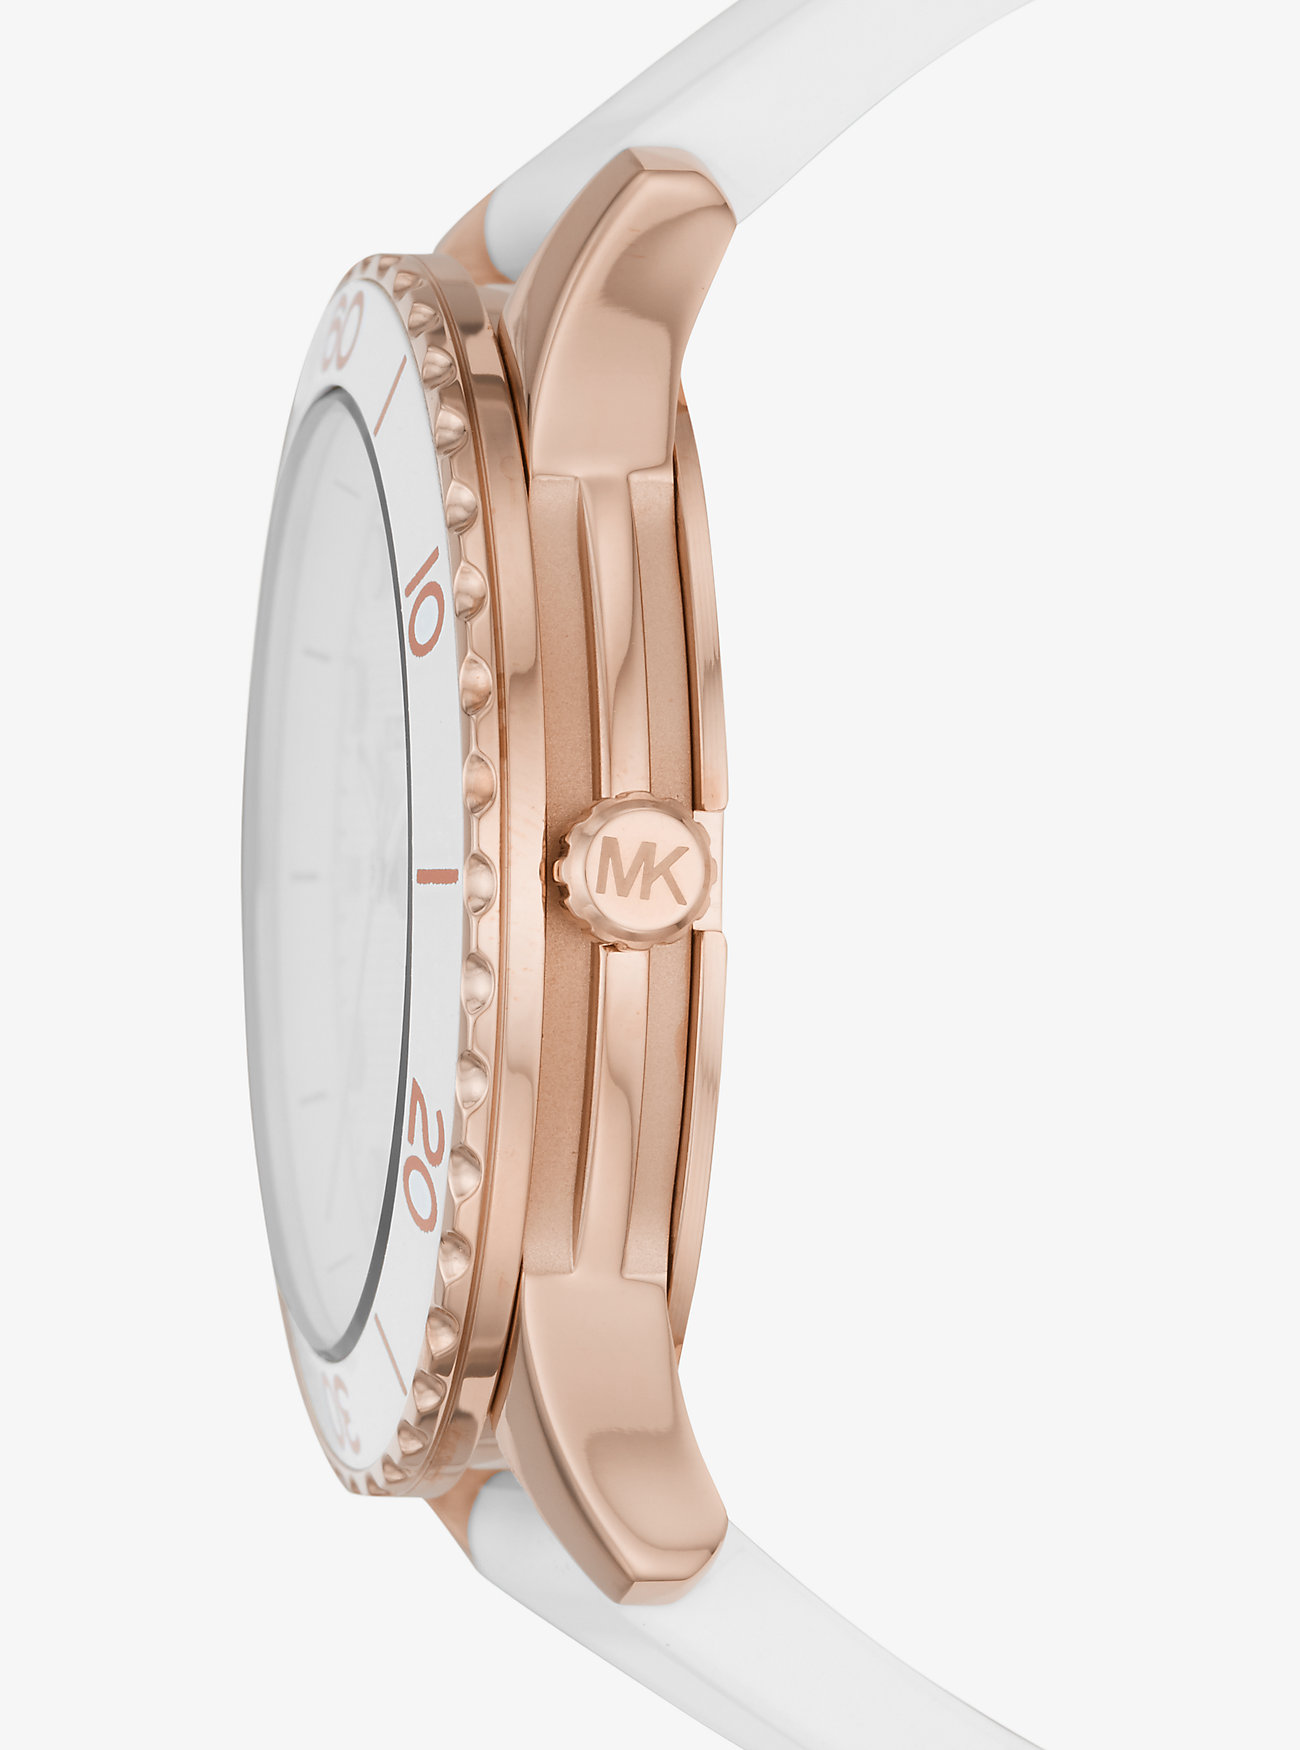 ĐỒNG HỒ ĐEO TAY MICHAEL KORS RUNWAY DIVE OVERSIZED ROSE GOLD-TONE SILICONE STRAP WATCH MK6853 7